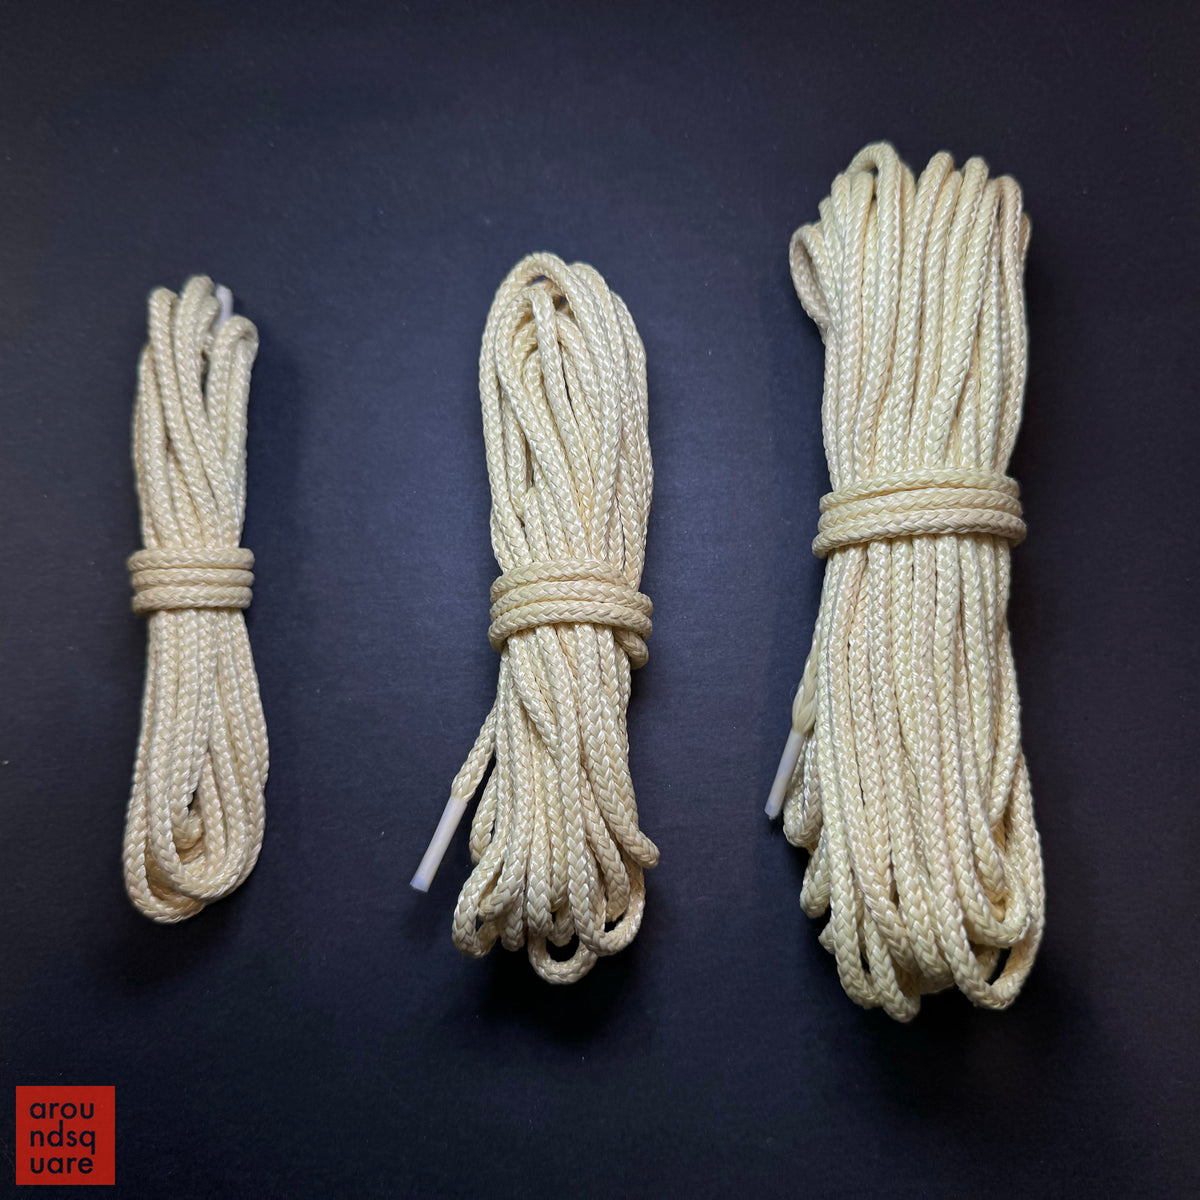 Strong 6mm paracord For Fabrication Possibilities 